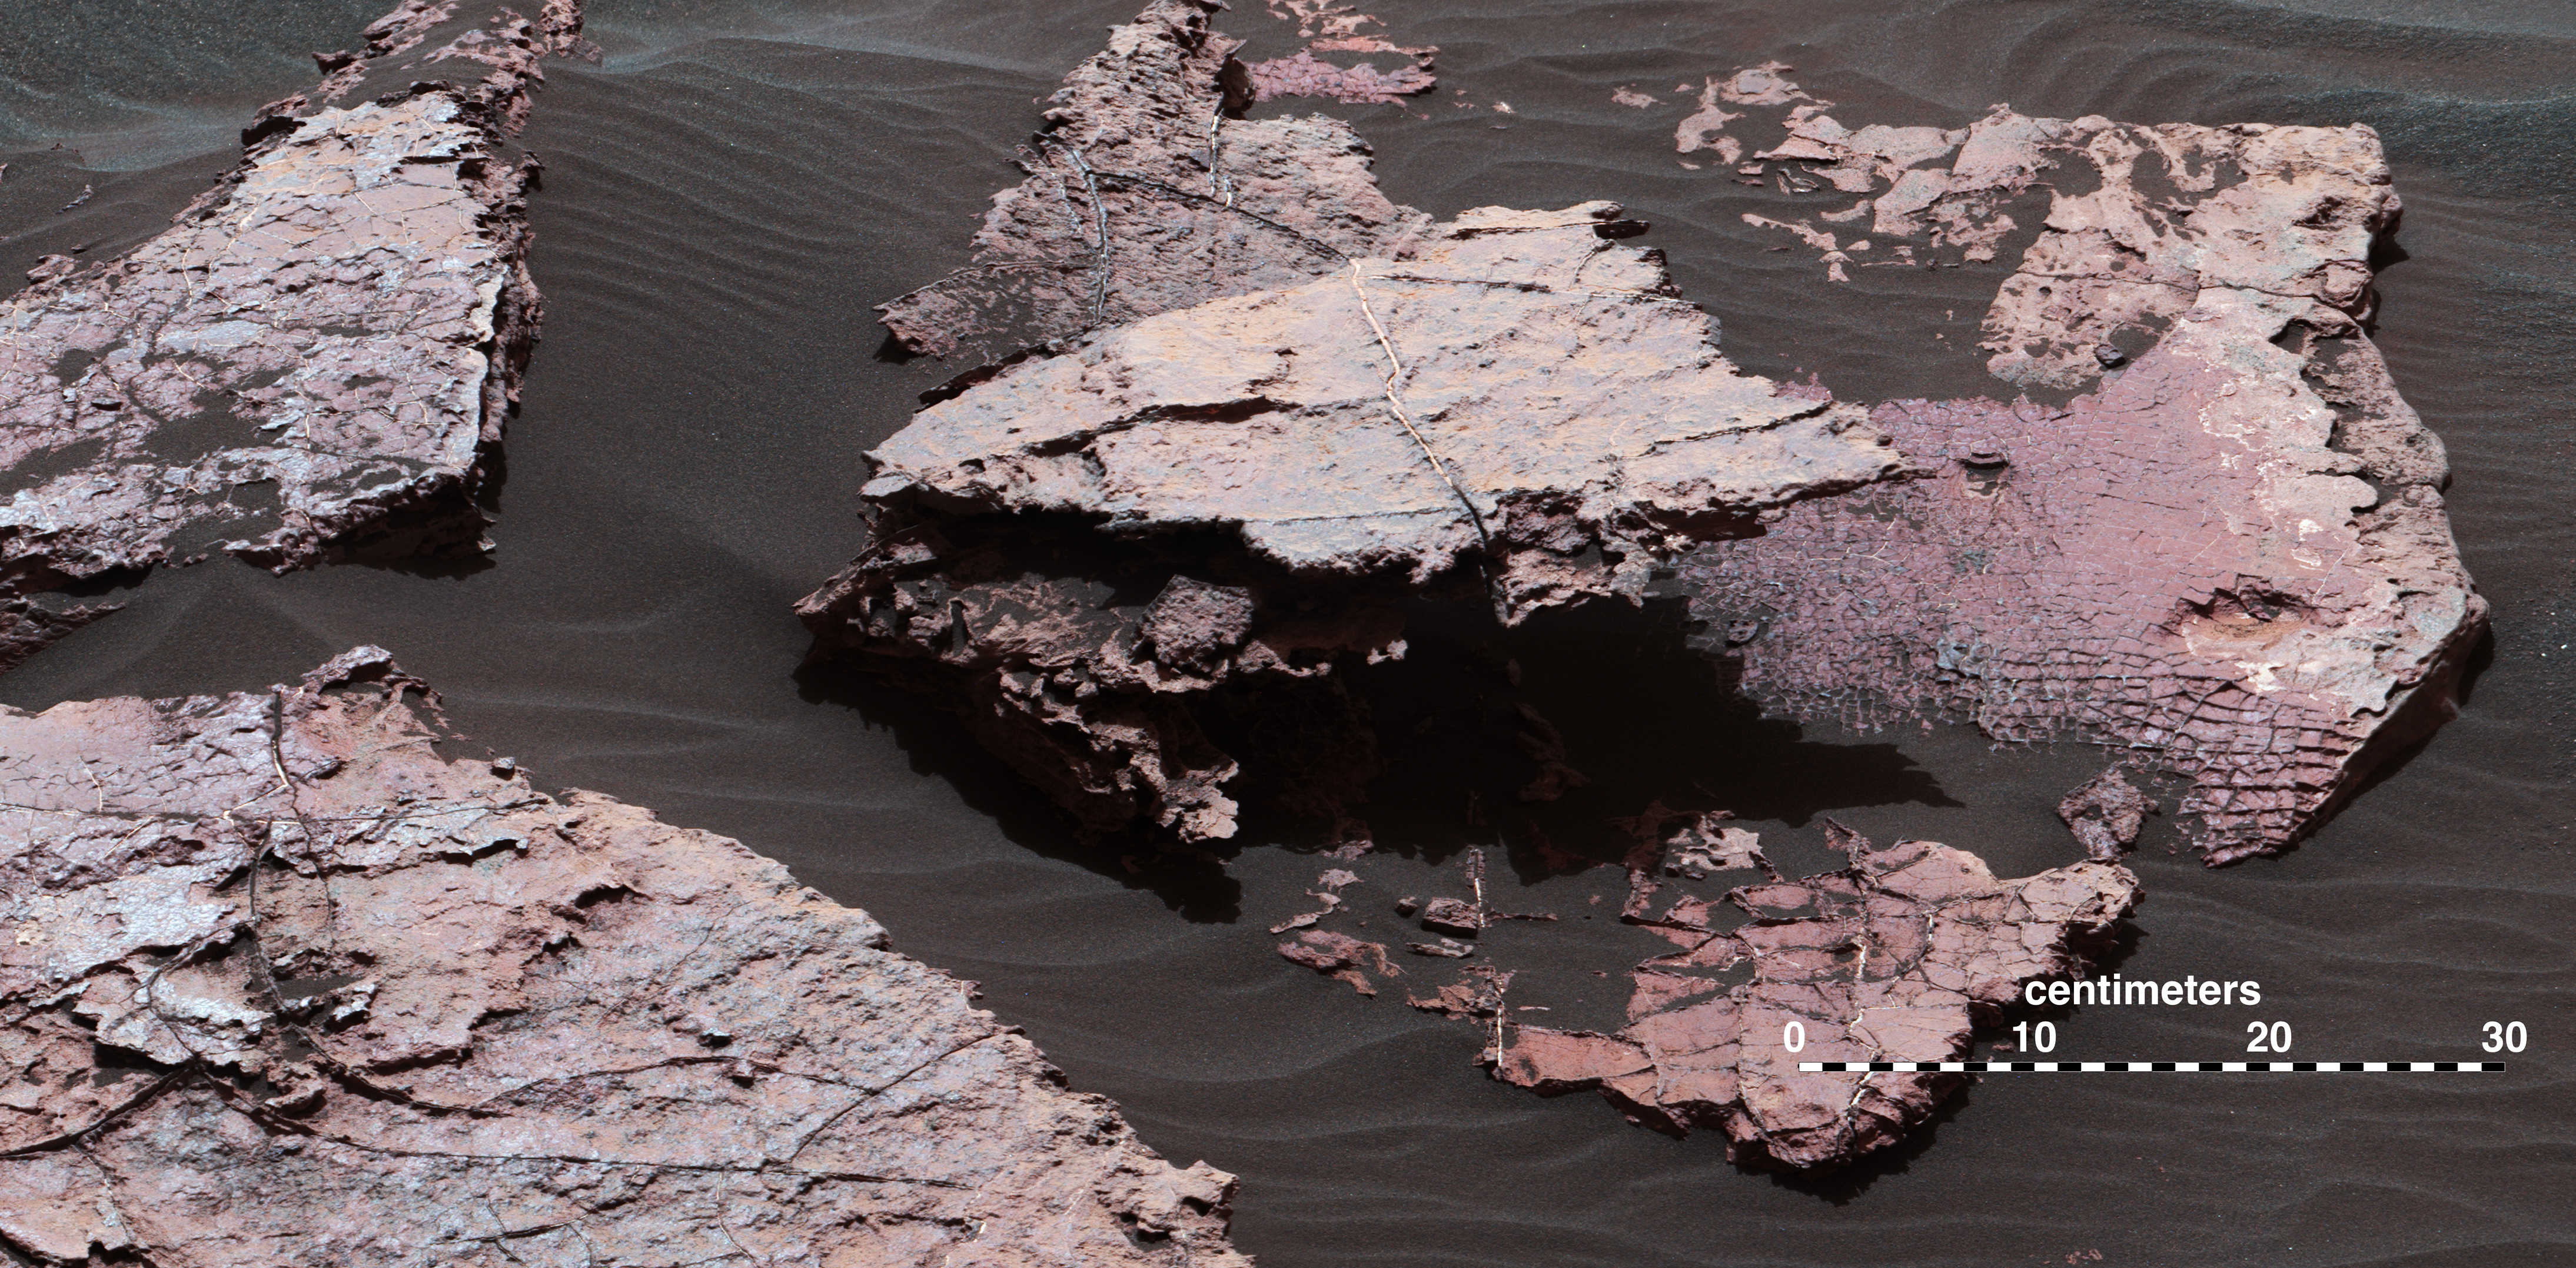 Possible Signs of Ancient Drying in Martian Rock